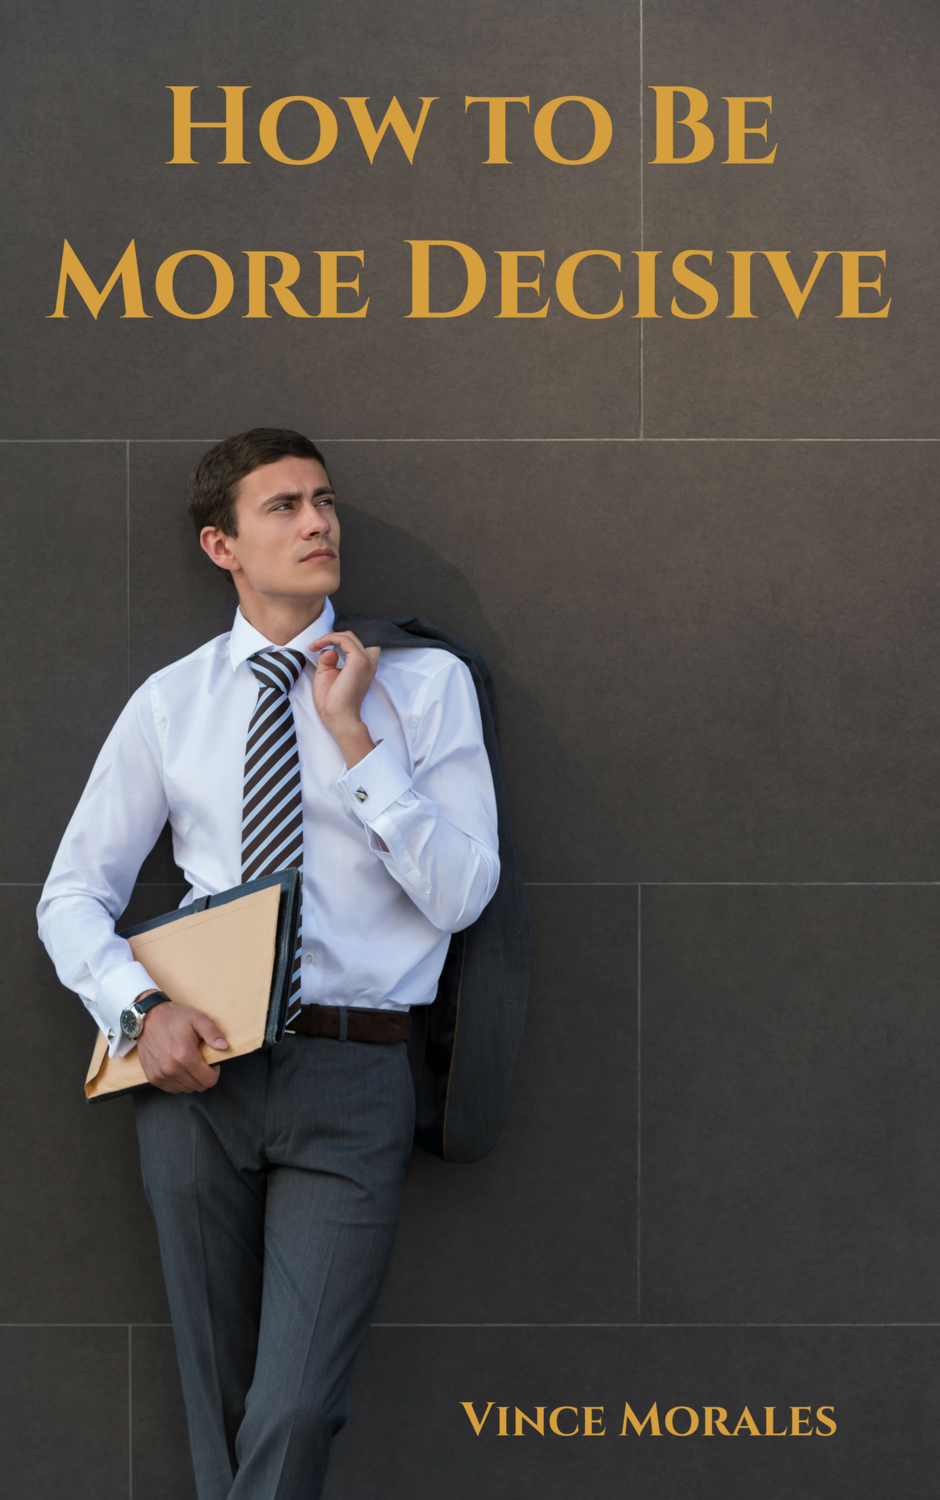 How To Be More Decisive by Vince Morales